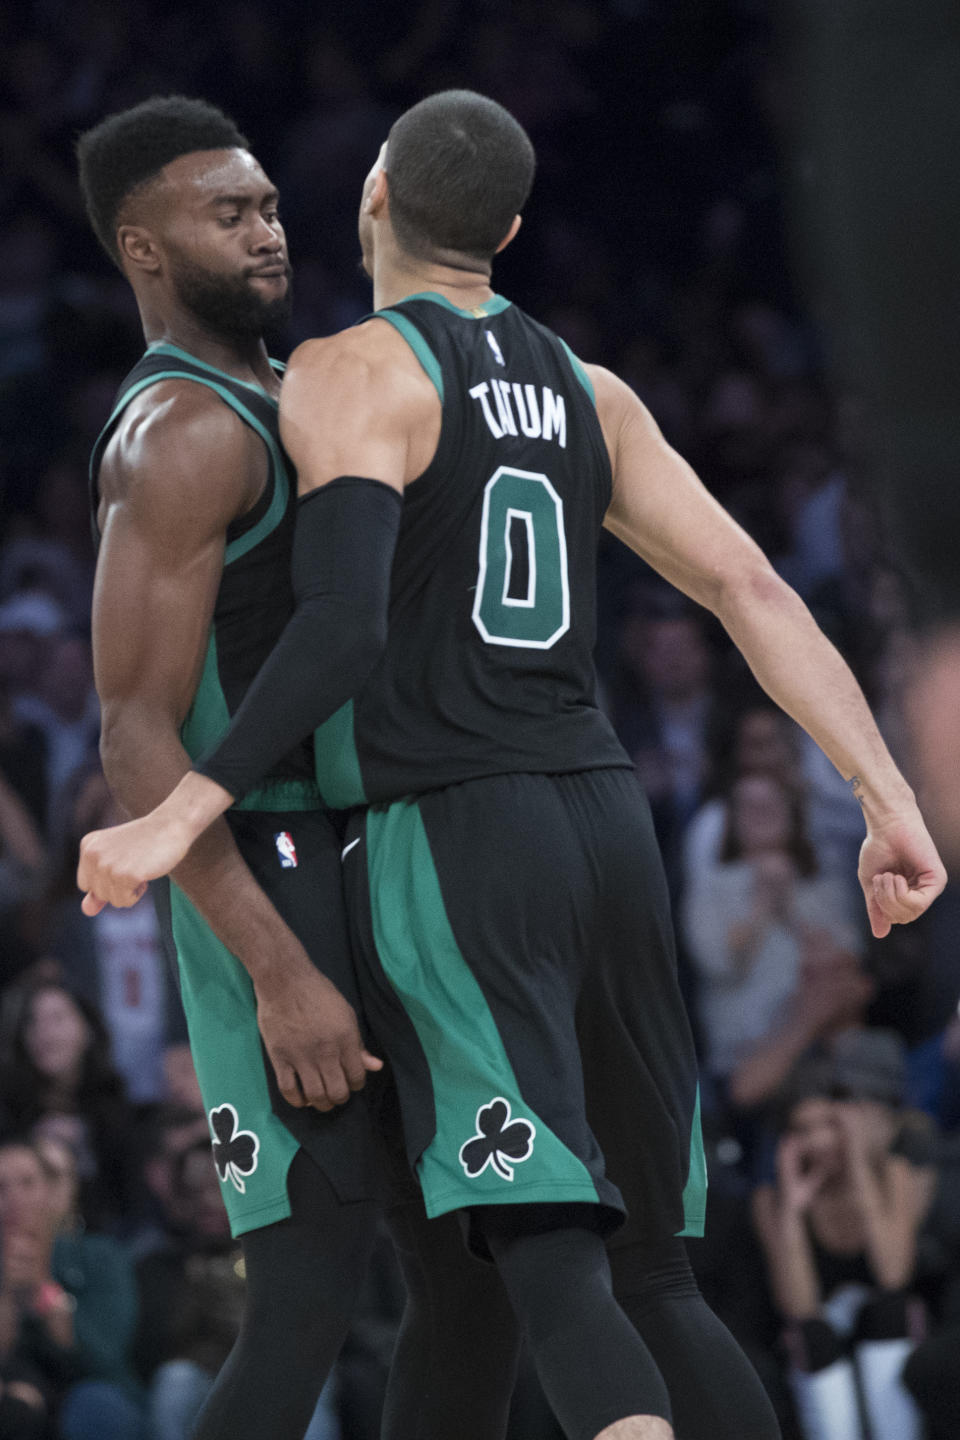 Boston Celtics forward Jayson Tatum (0) and forward Jaylen Brown celebrate after Tatum scored the winning goal during the second half of an NBA basketball game New York Knicks, Saturday, Oct. 20, 2018, at Madison Square Garden in New York. (AP Photo/Mary Altaffer)